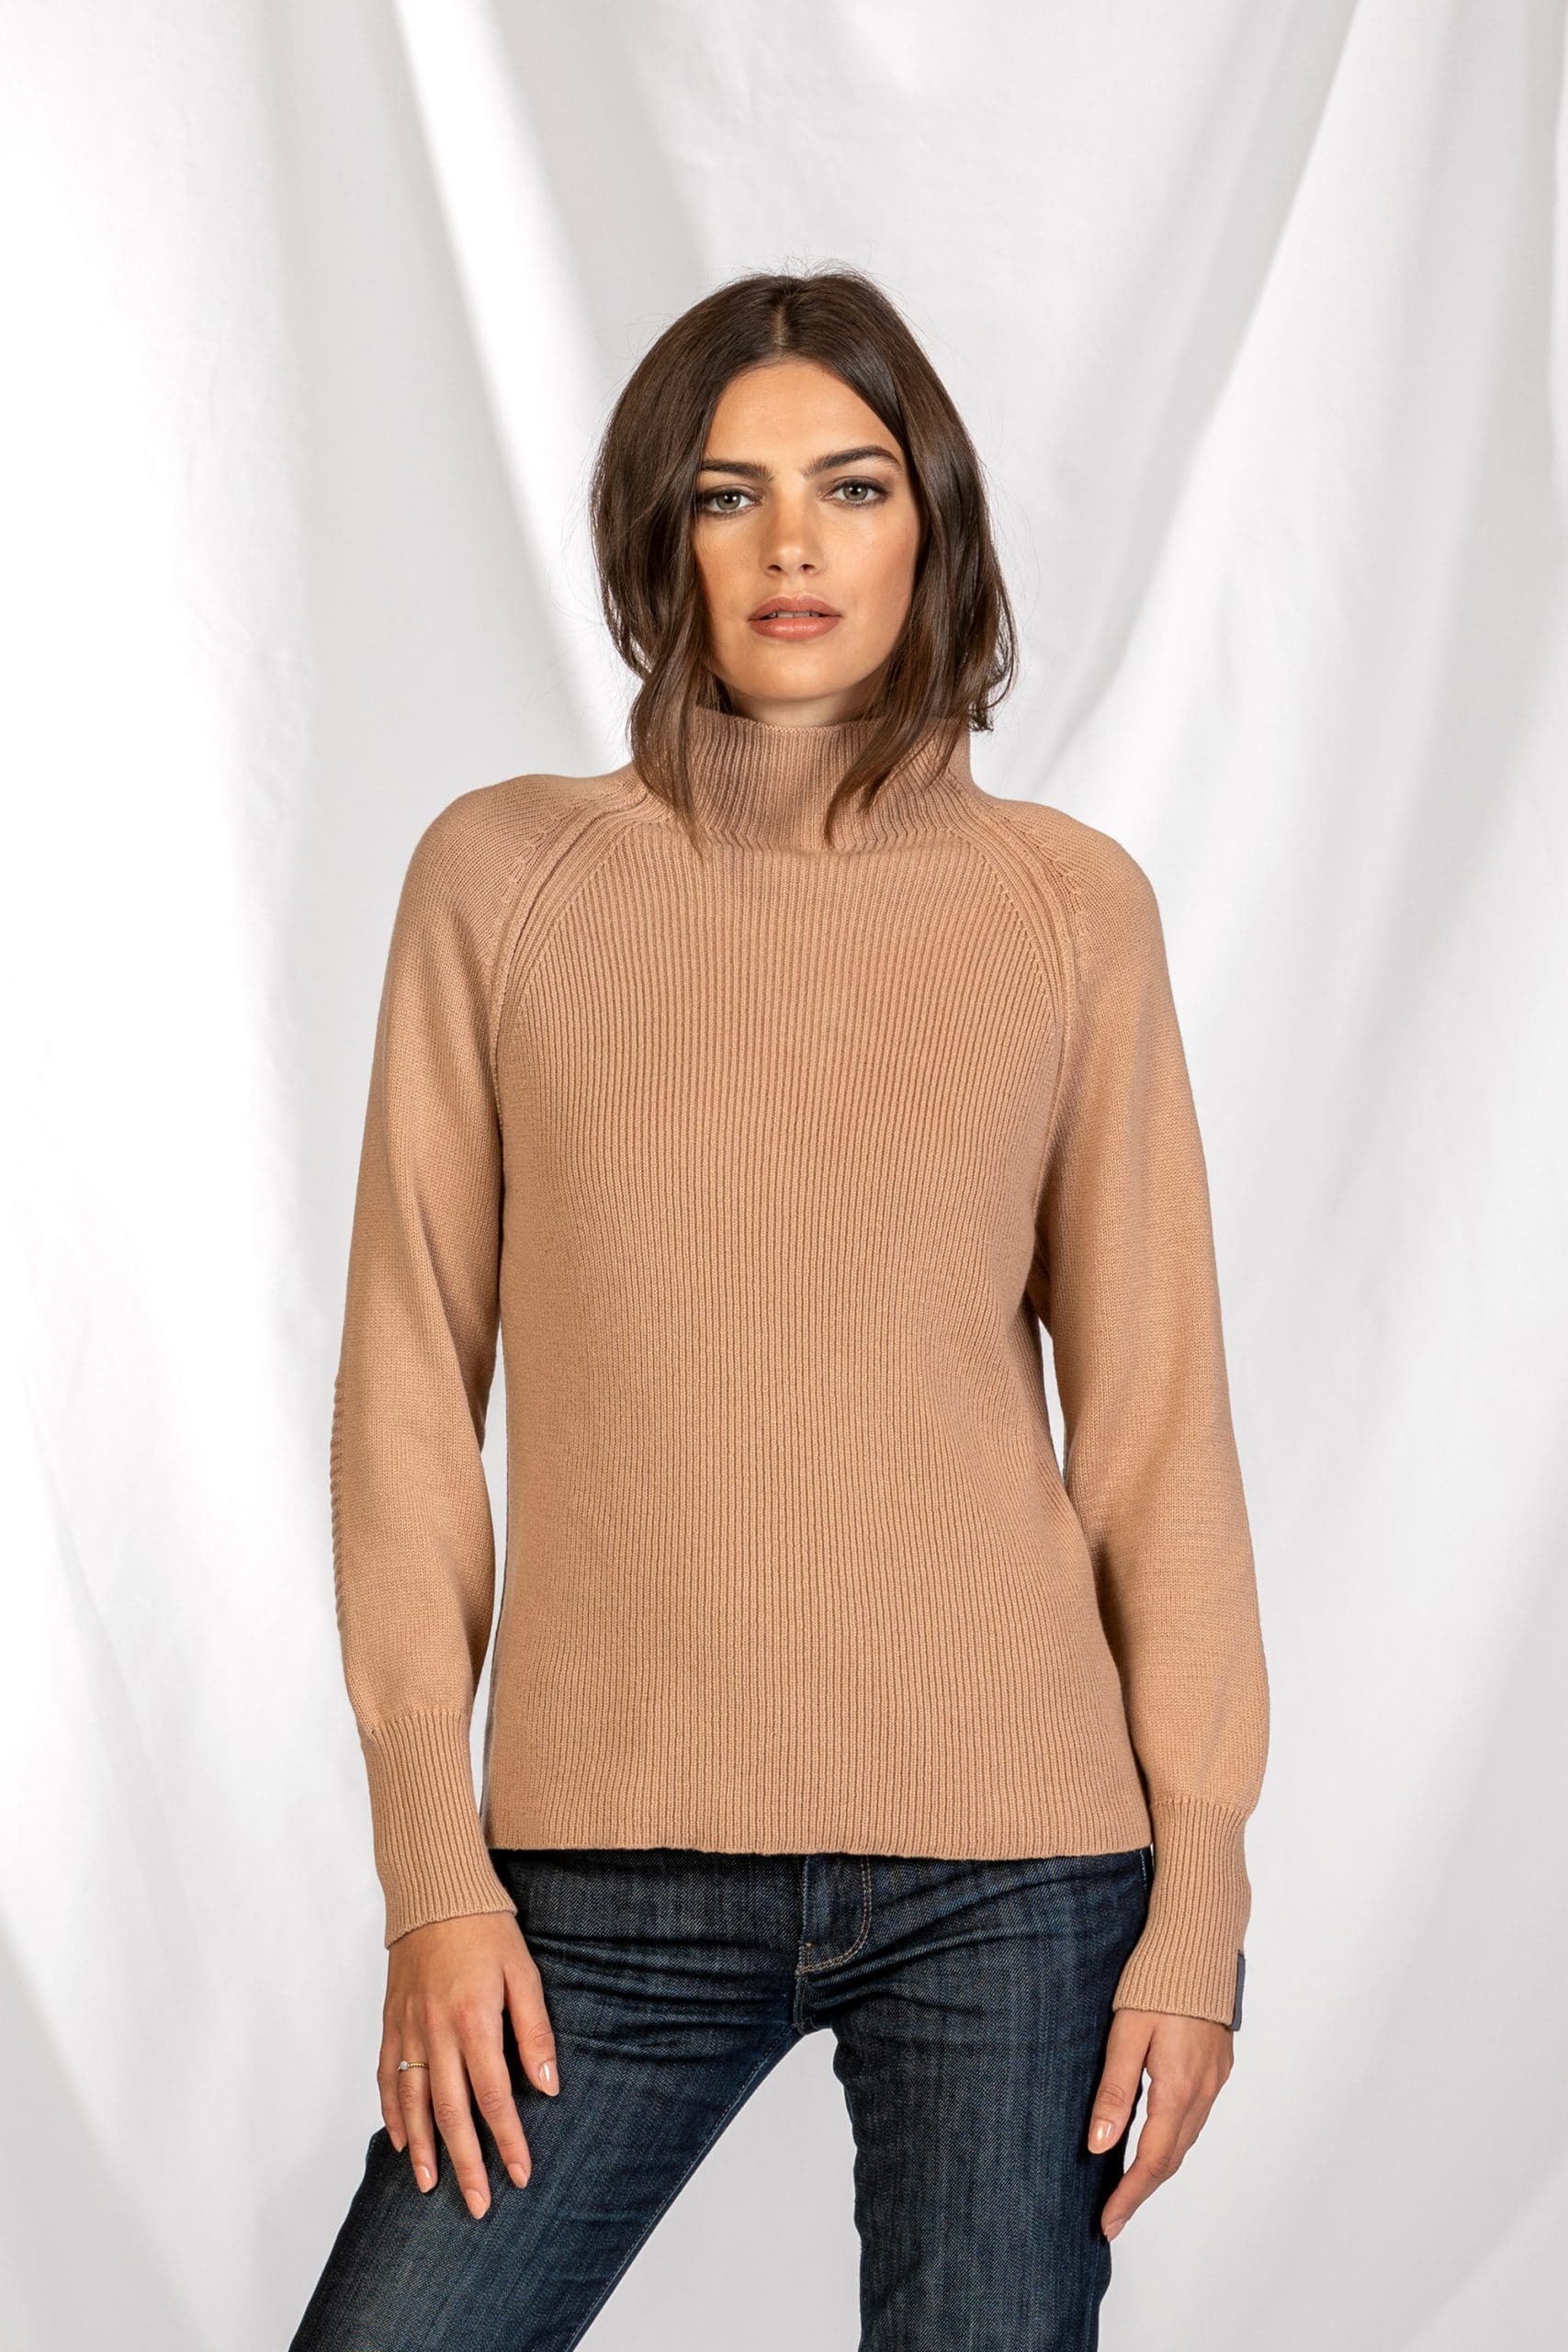 Cashmere pullover stand-up collar camel